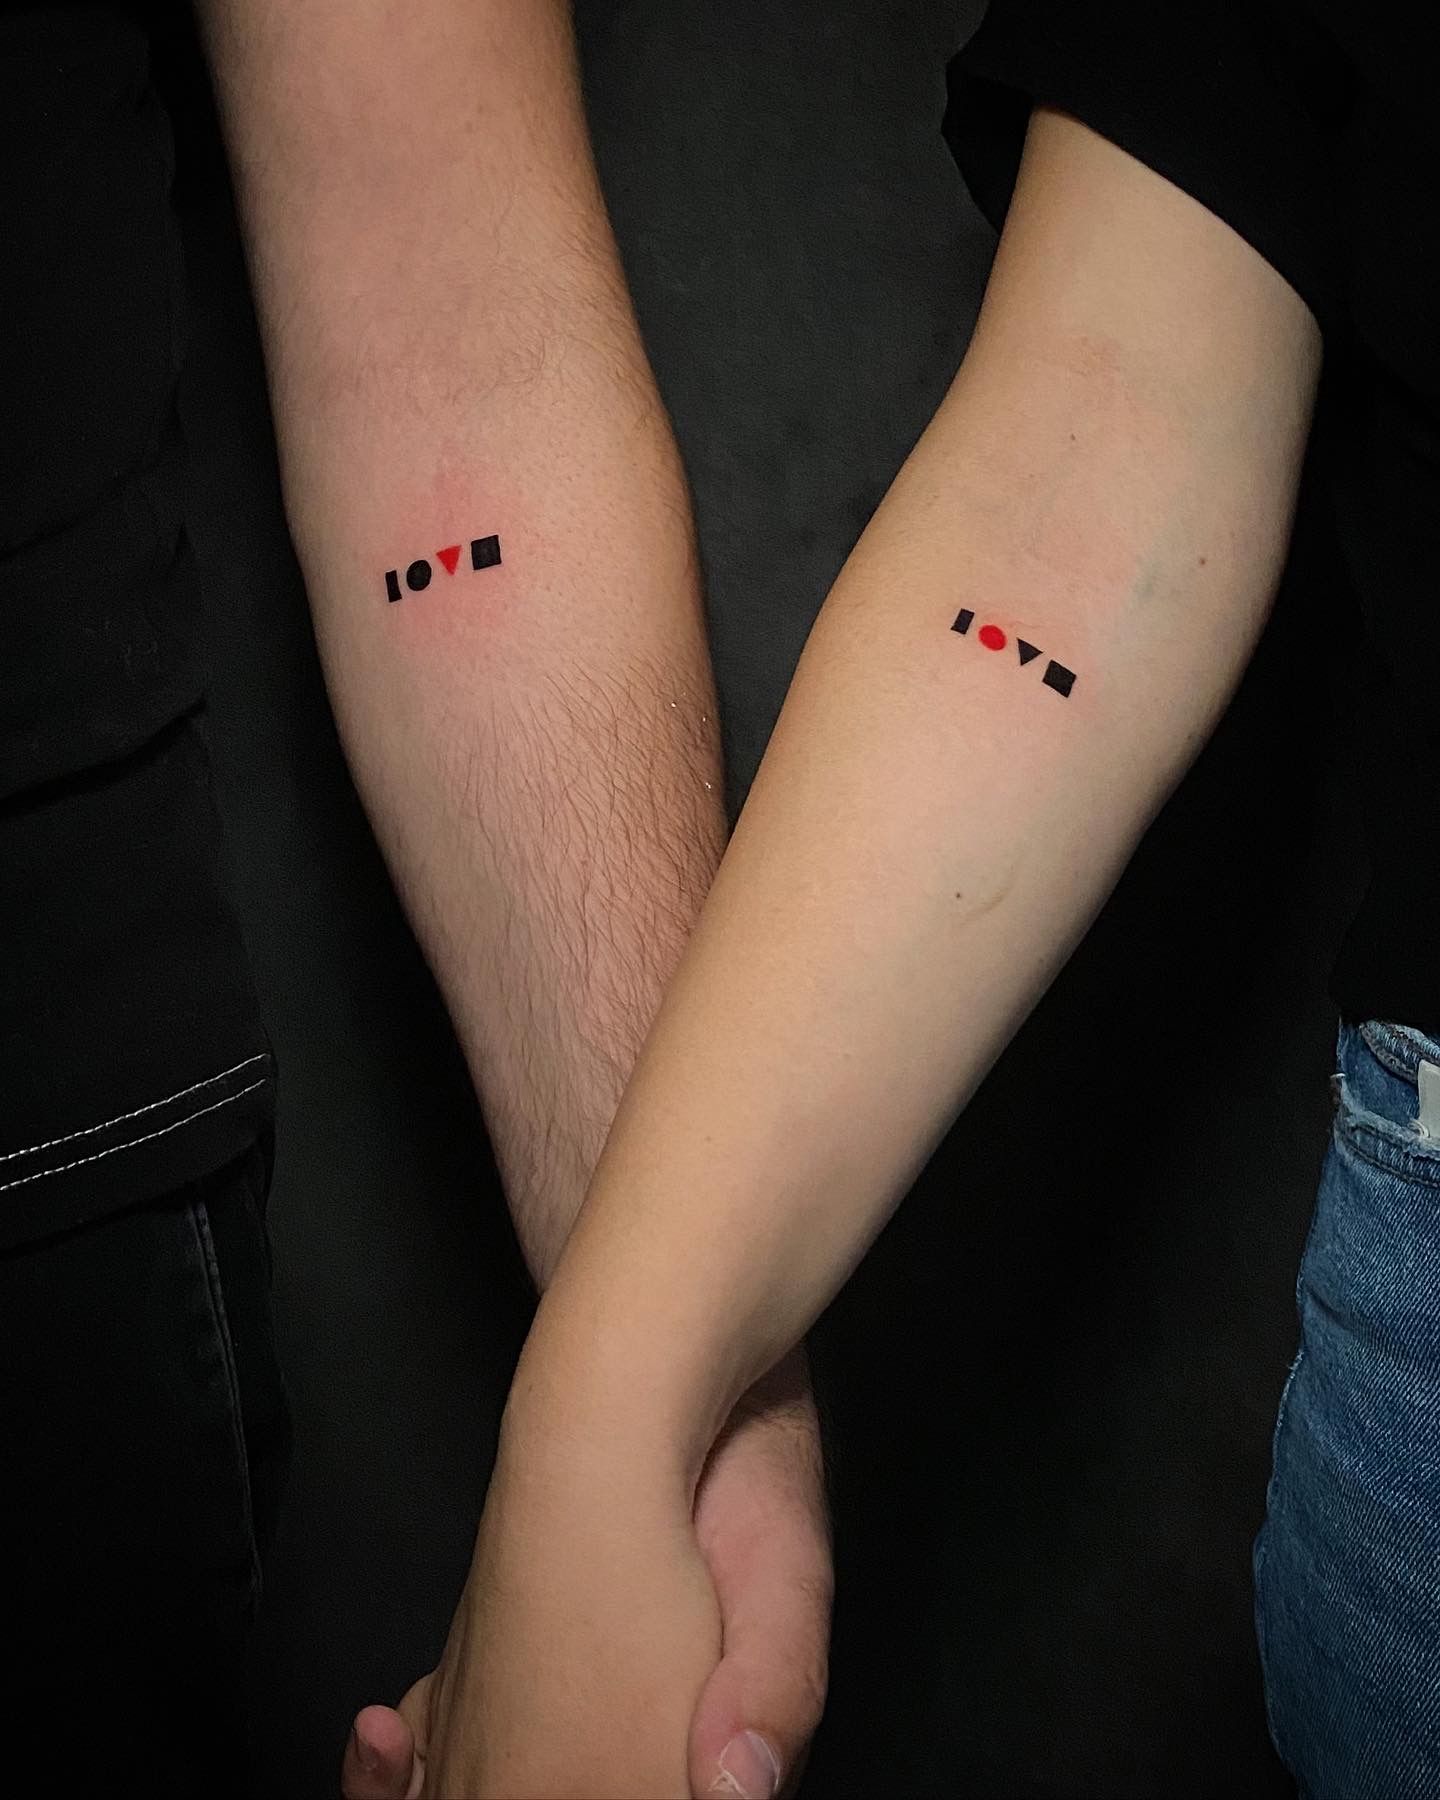 Lovely Small Matching Tattoo on Arm  Small Matching Tattoos  Small Tattoos   MomCanvas